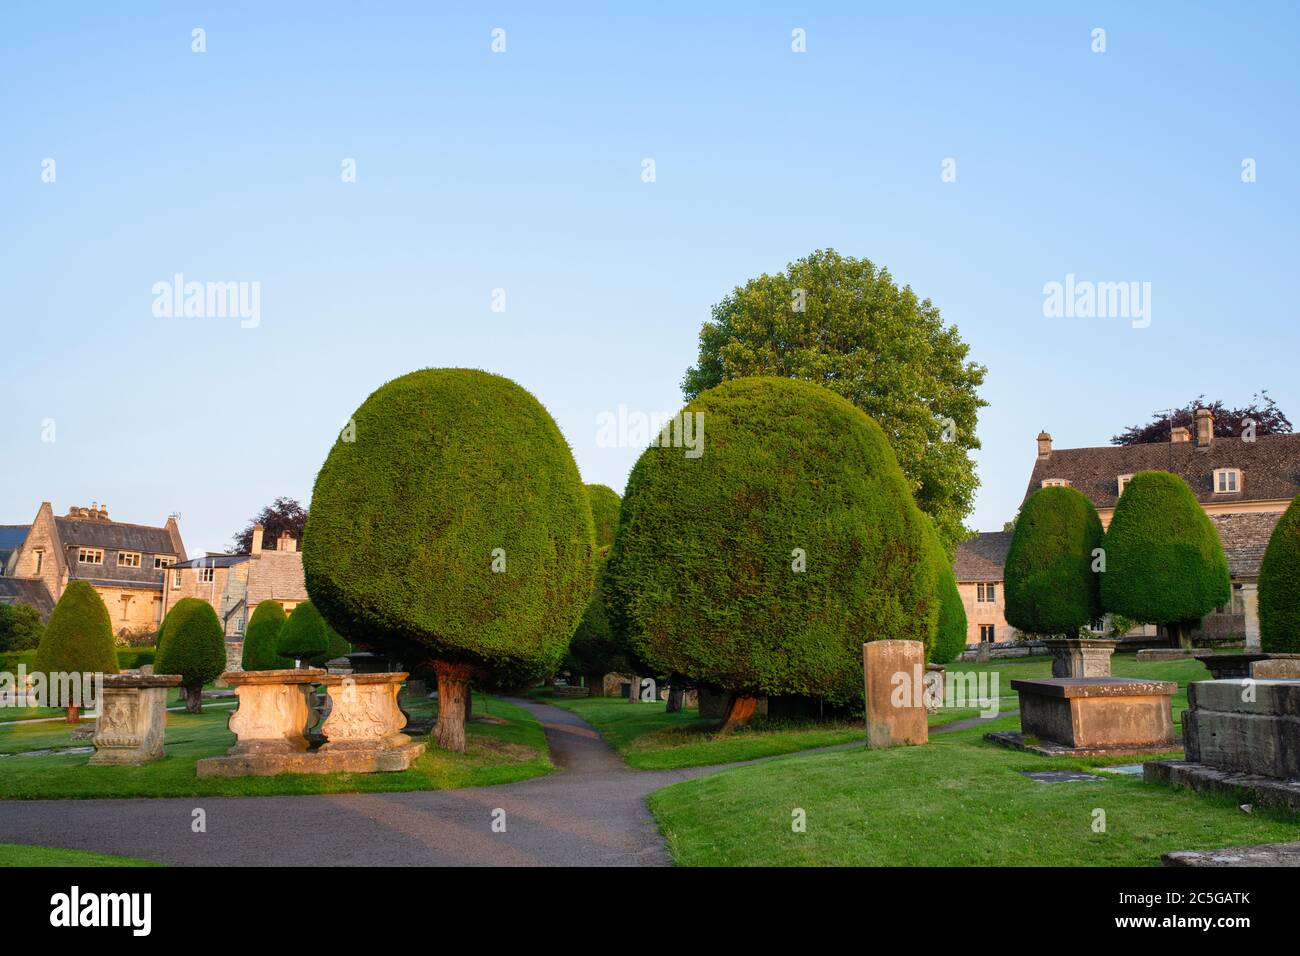 Yew trees and headstones in St Marys churchyard at sunrise. Painswick, Cotswolds, Gloucestershire, England Stock Photo